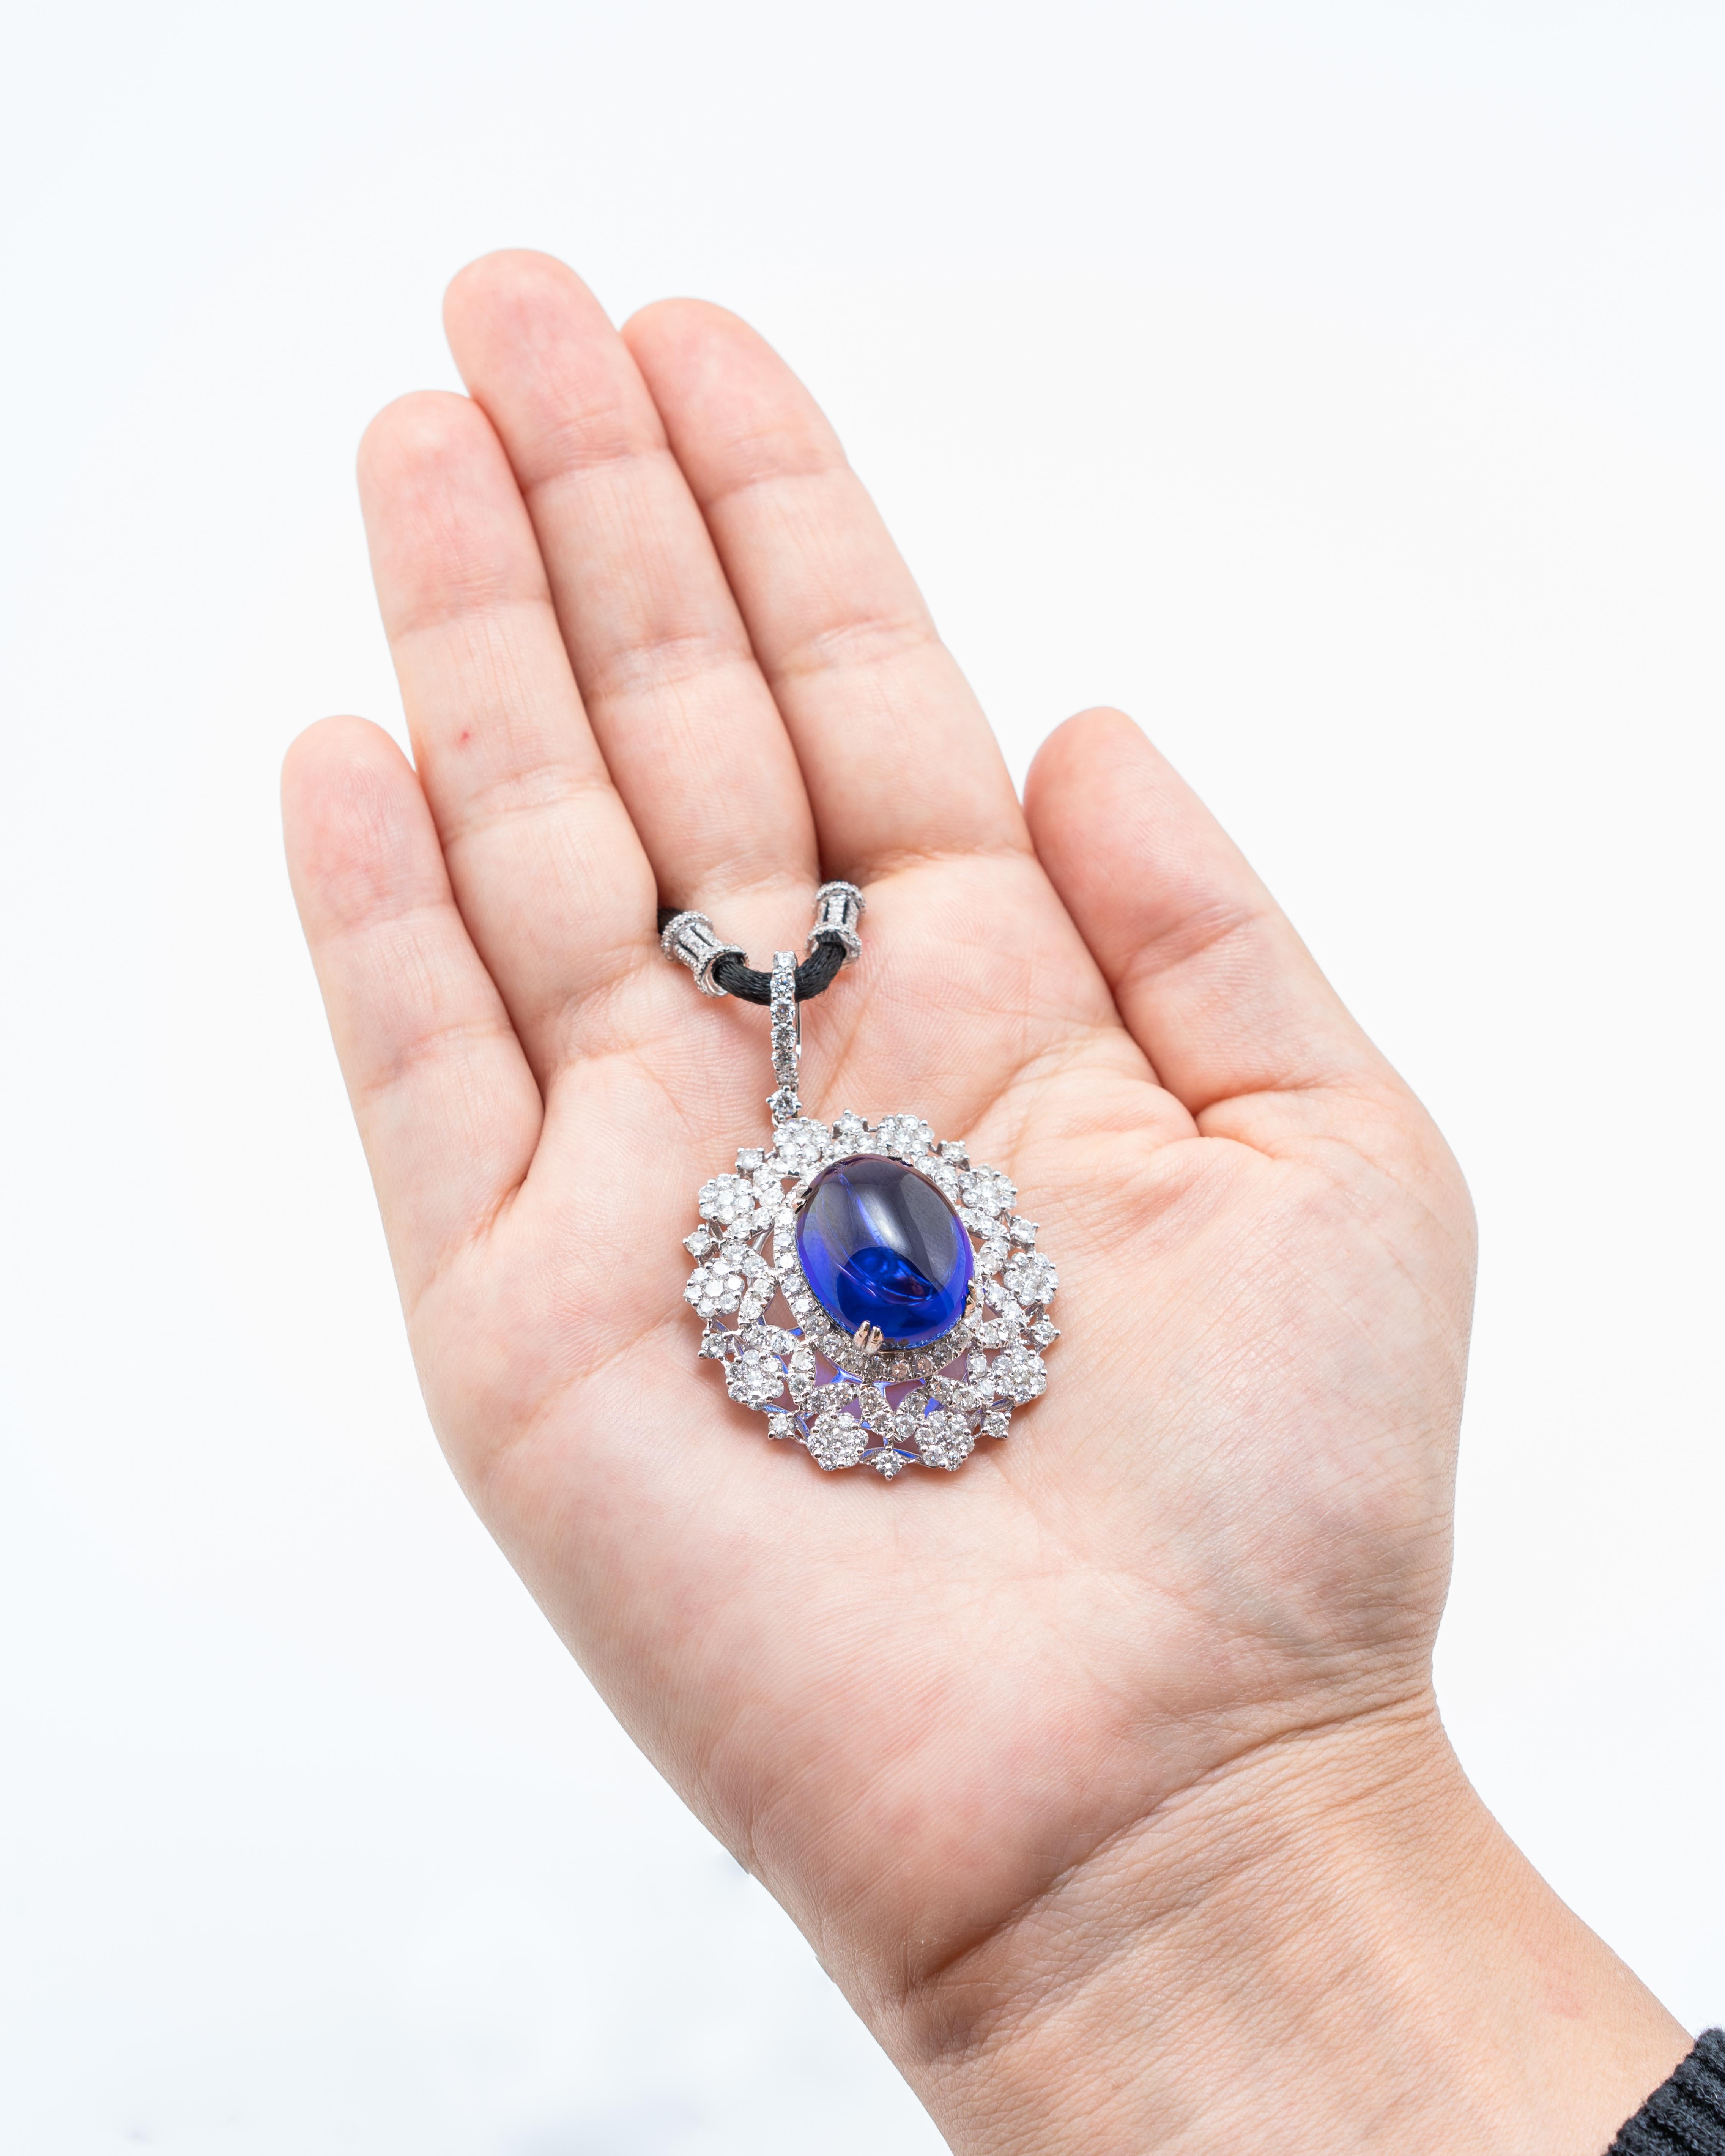 A stunning 22.12 carat natural Tanzanite Cabochon pendant, adorned with diamonds - all set in 18K solid white gold. The centre stone is absolutely clean, with no inclusions and great lustre. The colour is AAAA. Video can be provided upon request.